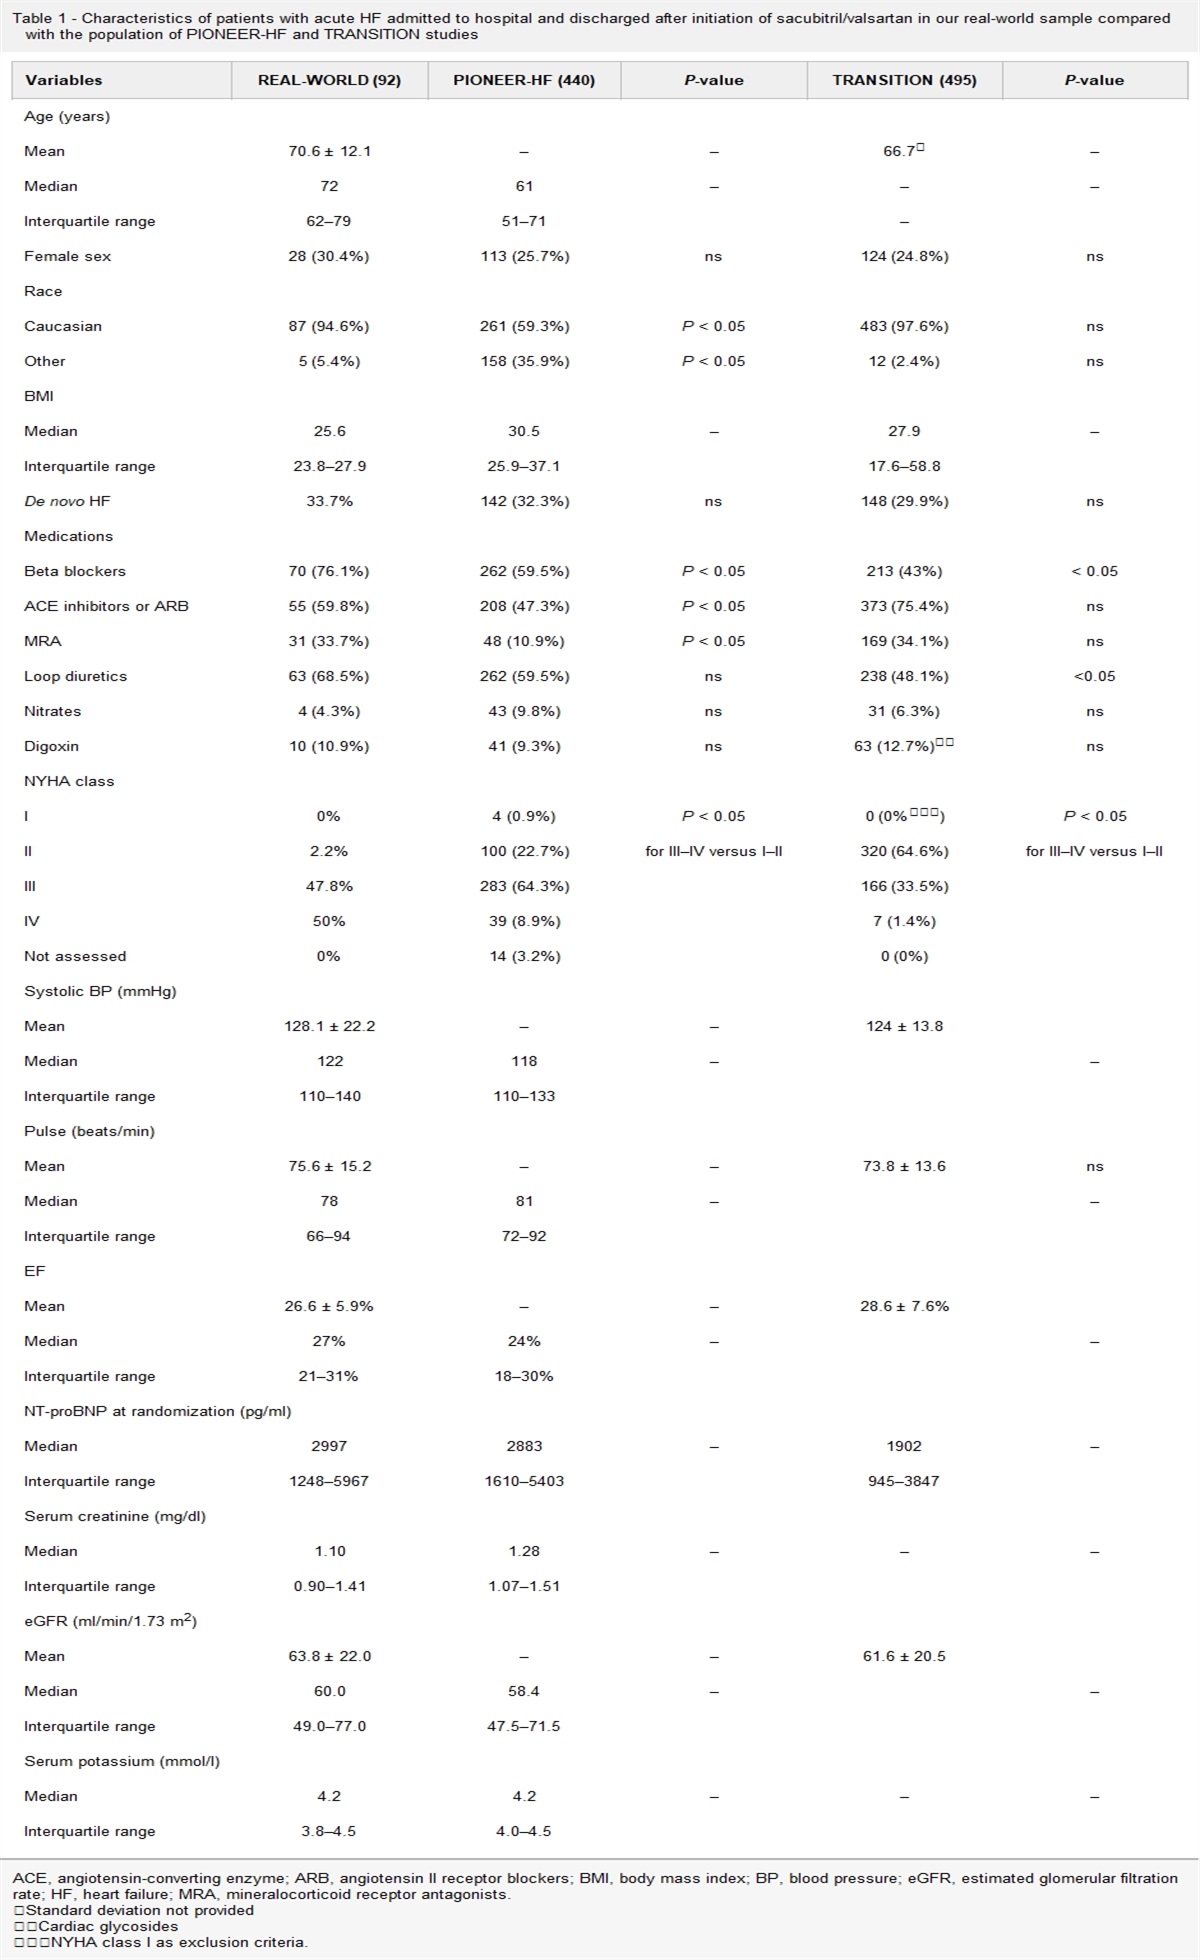 Characteristics of patients hospitalized for acute heart failure and discharged from an emergency medicine ward with sacubitril-valsartan: differences with patients in the PIONEER-HF and TRANSITION studies